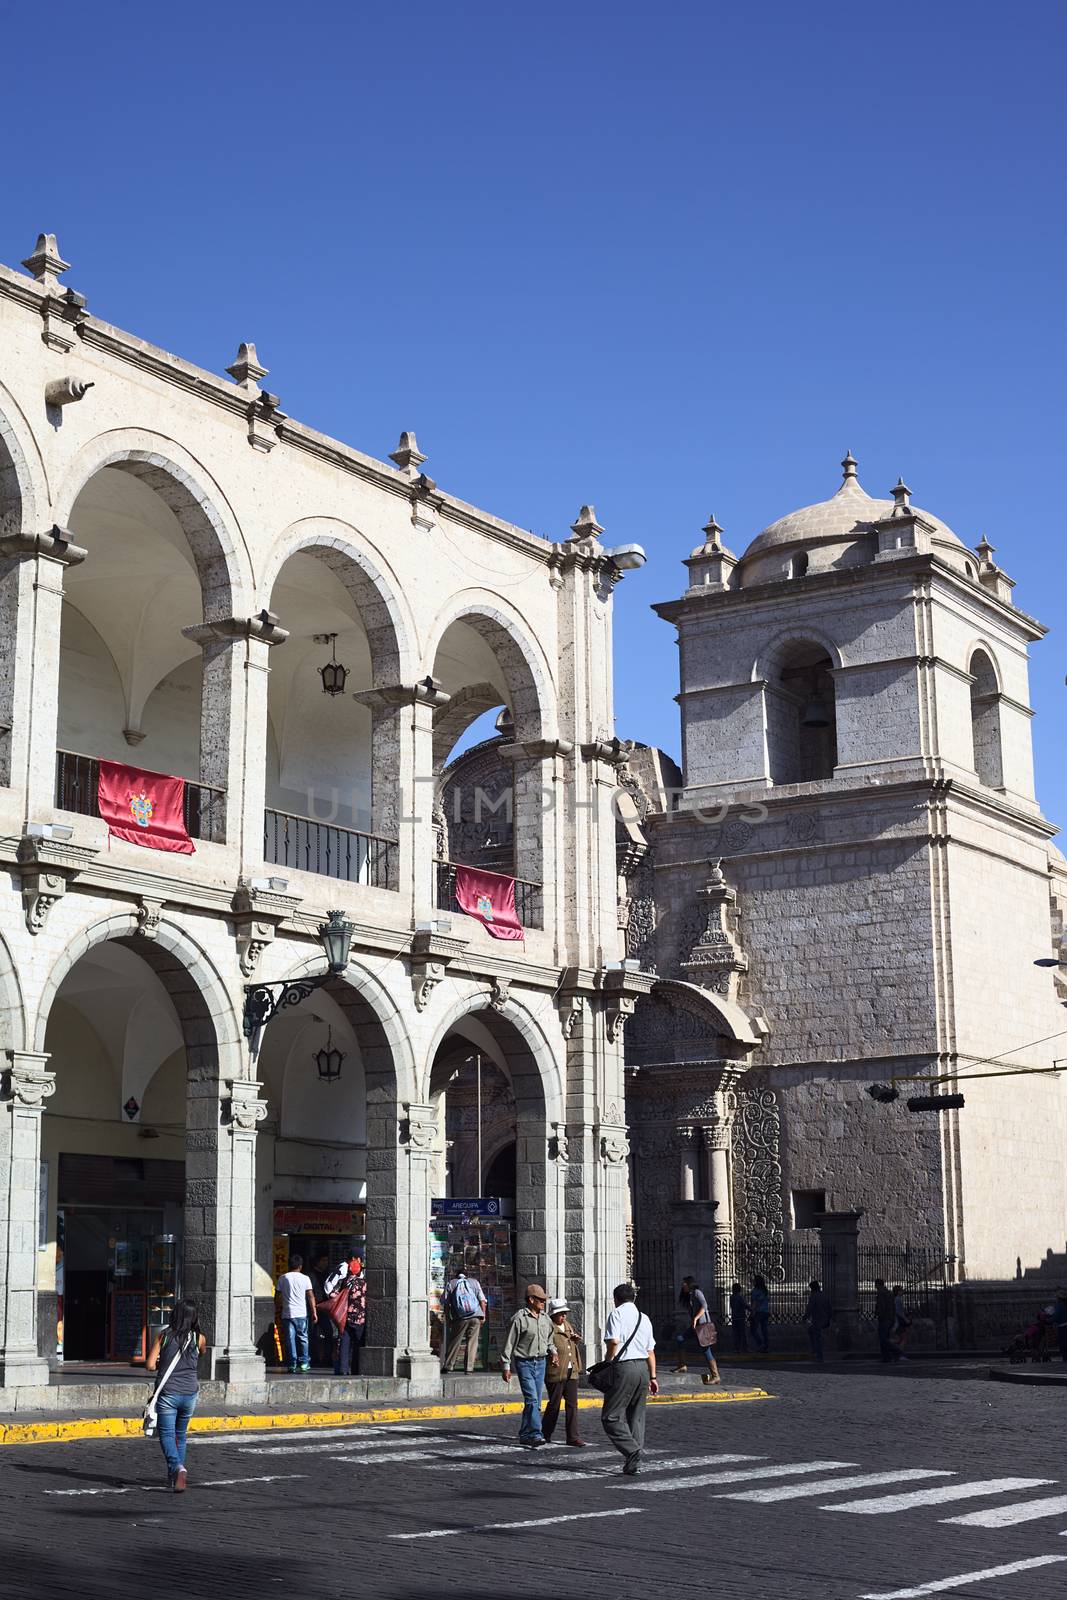 AREQUIPA, PERU - AUGUST 22, 2014: Paseo Portal de Flores and tower of the Iglesia de la Compania at the Plaza de Armas (main square) on August 22, 2014 in Arequipa, Peru. The historic city center of Arequipa is an UNESCO World Cultural Heritage Site. 